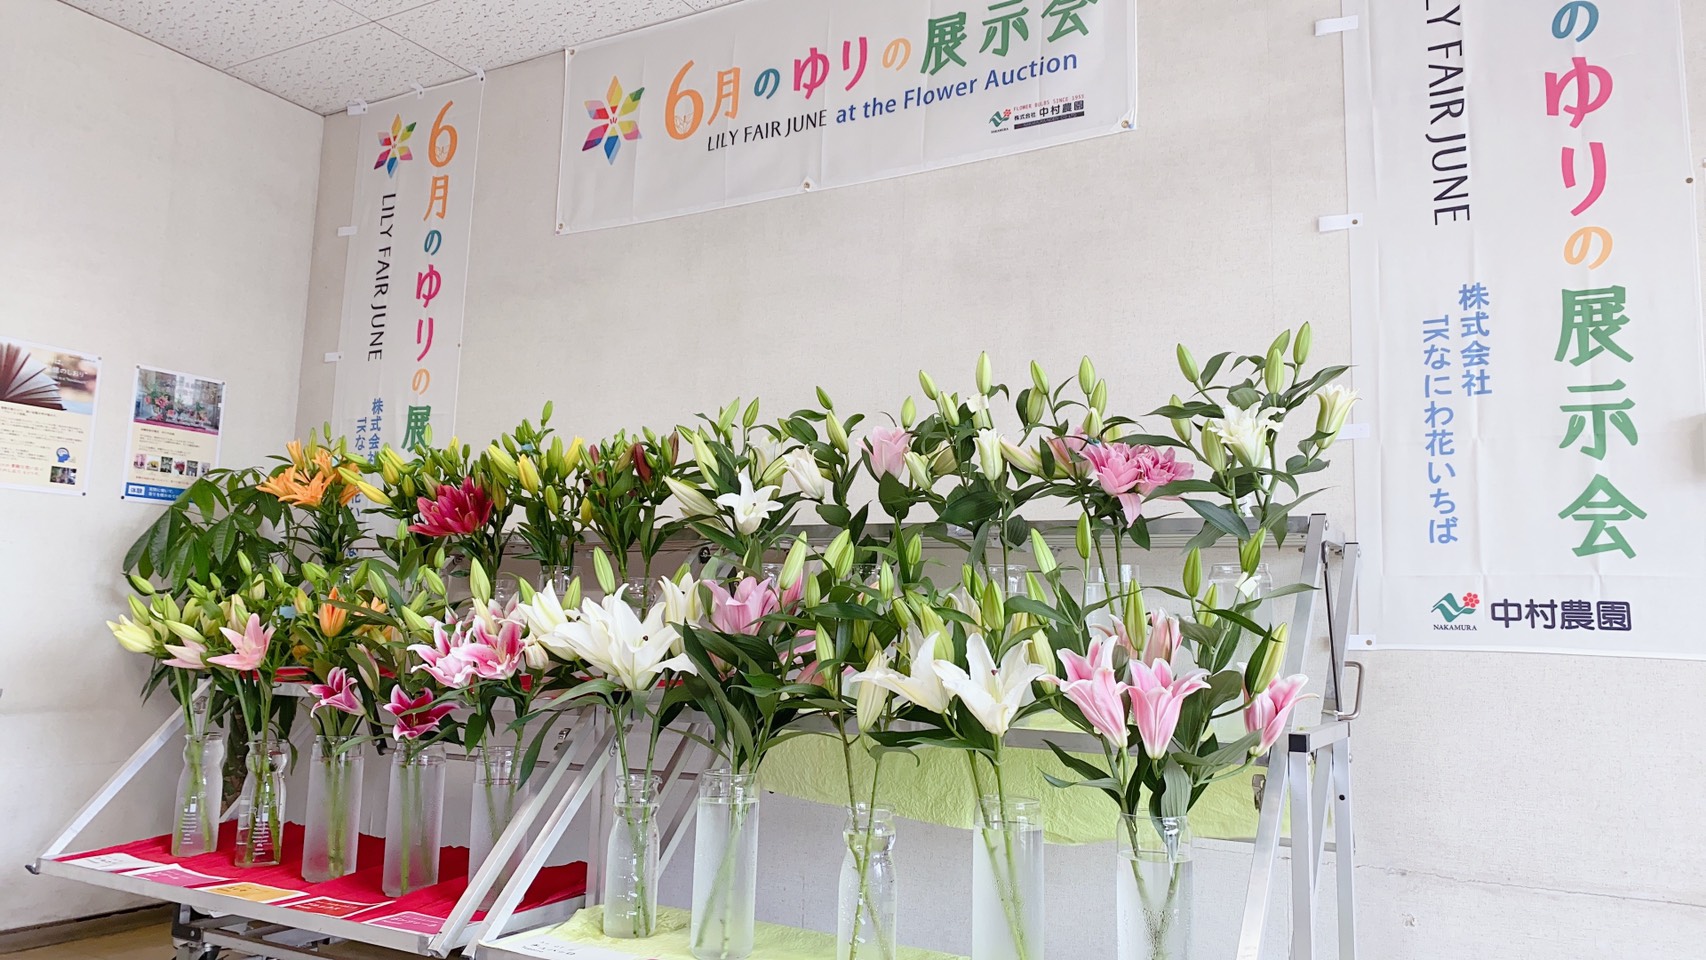 ｔｋなにわ花いちば 出張展示会 Lily Fair June At The Flower Auction21 株式会社中村農園